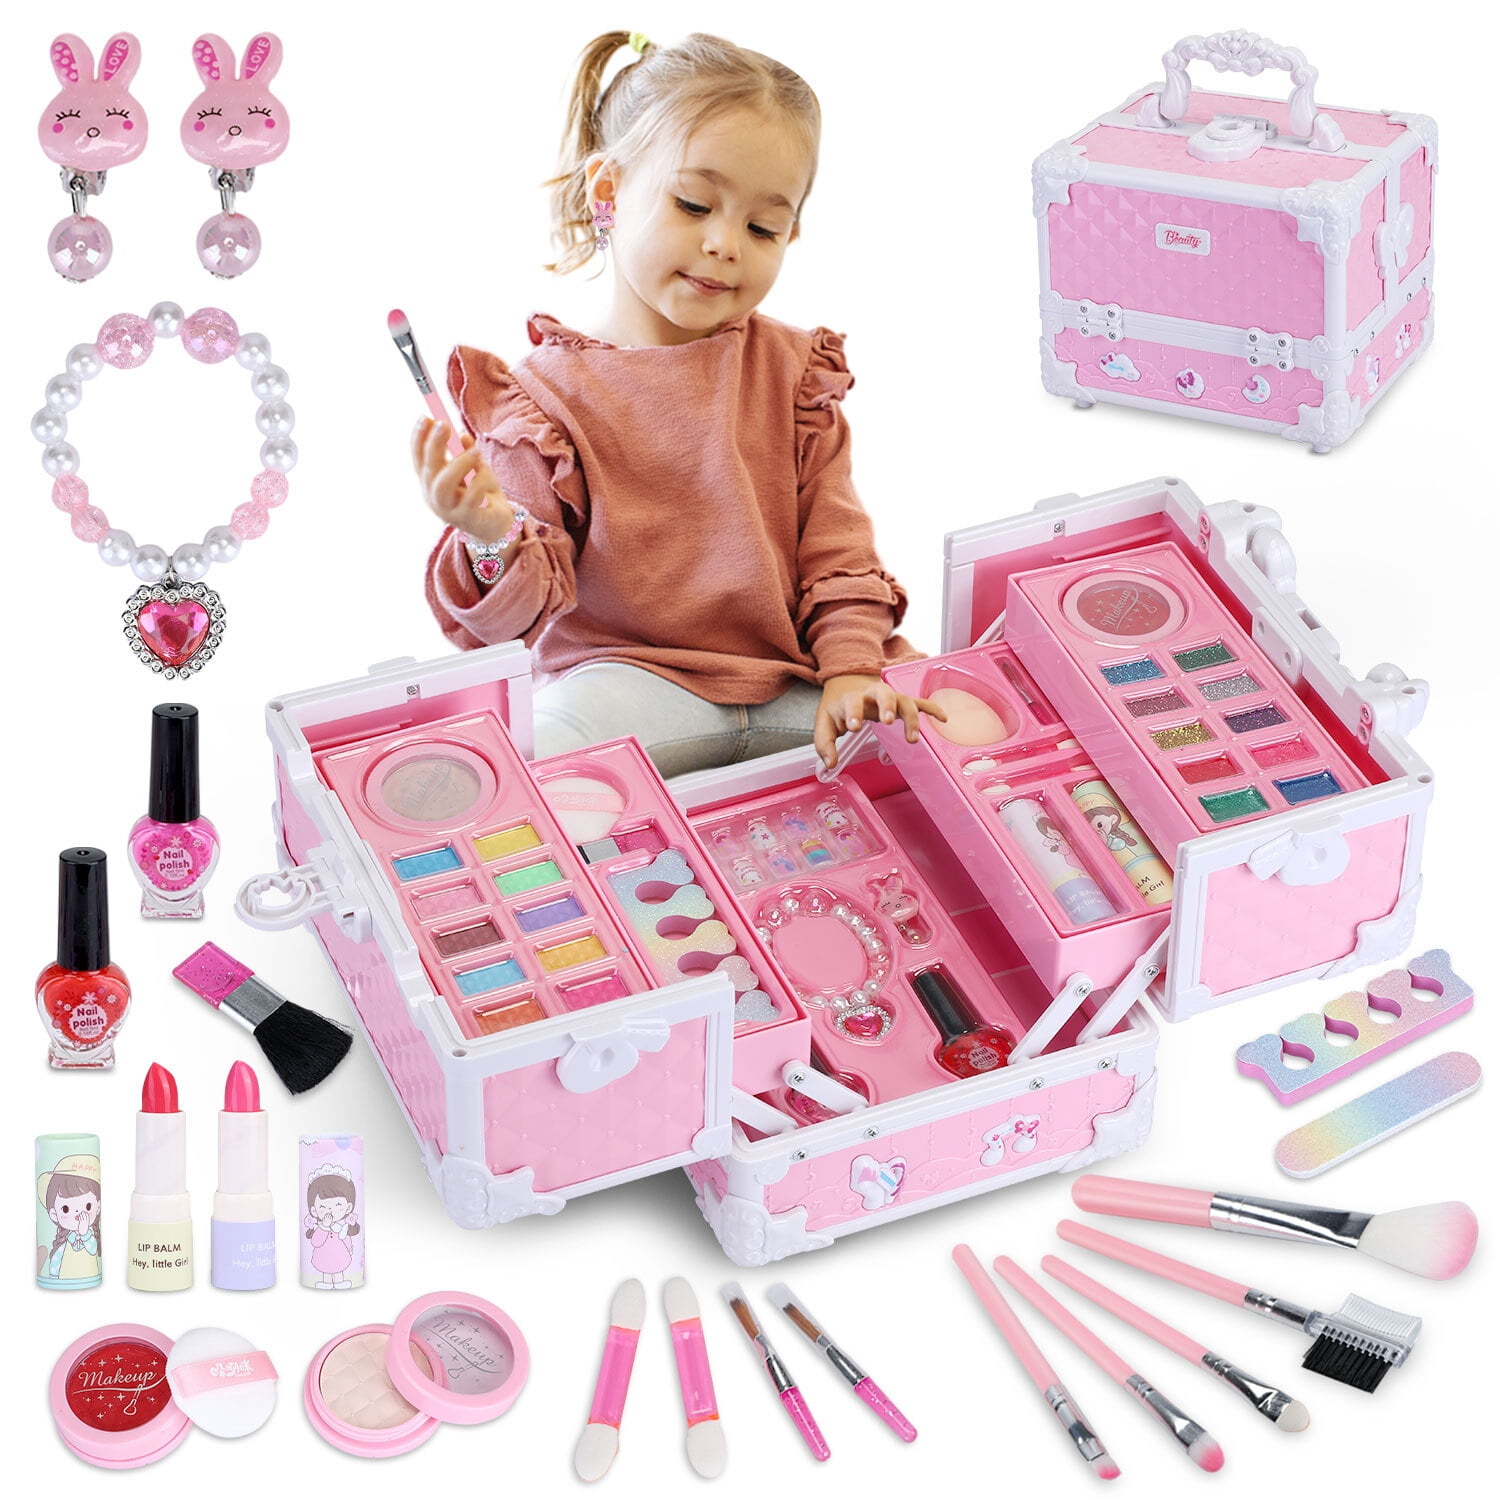 WATTNE Kids Makeup Kit for Girls 47Pcs Washable Real Cosmetic, Safe ...